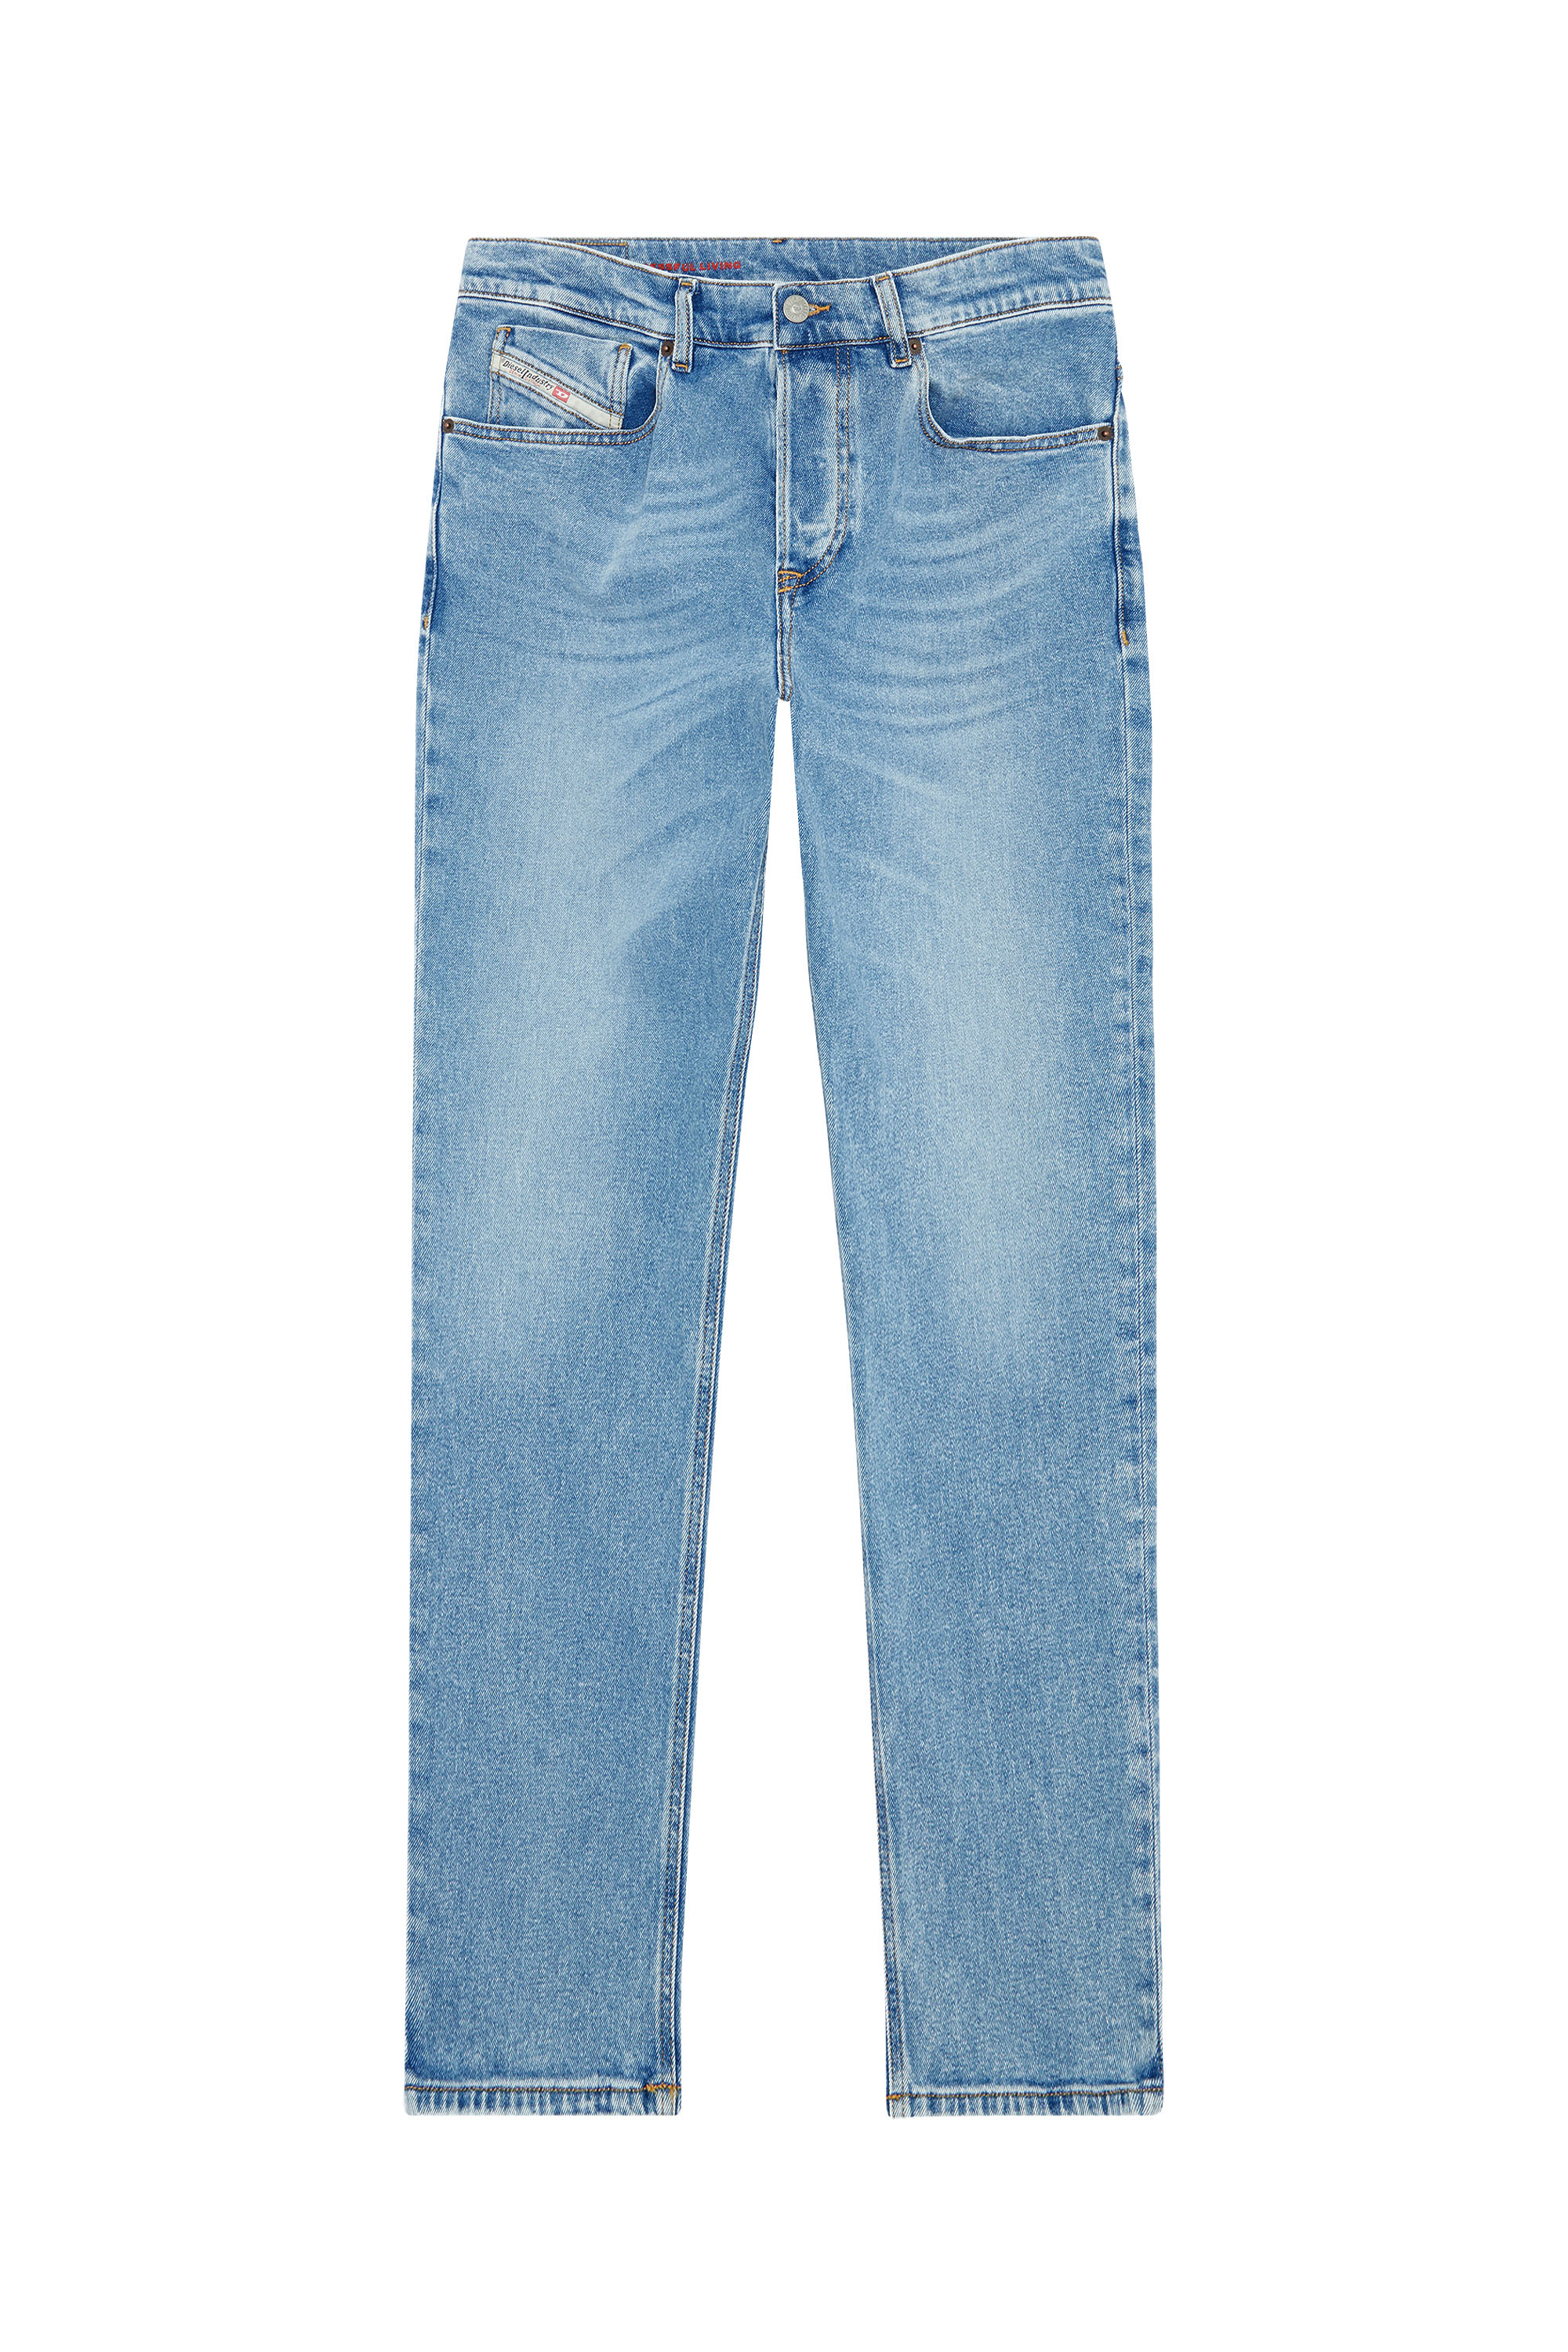 Tapered Jeans 2005 D-Fining 9B92L, Bleu Clair - Jeans